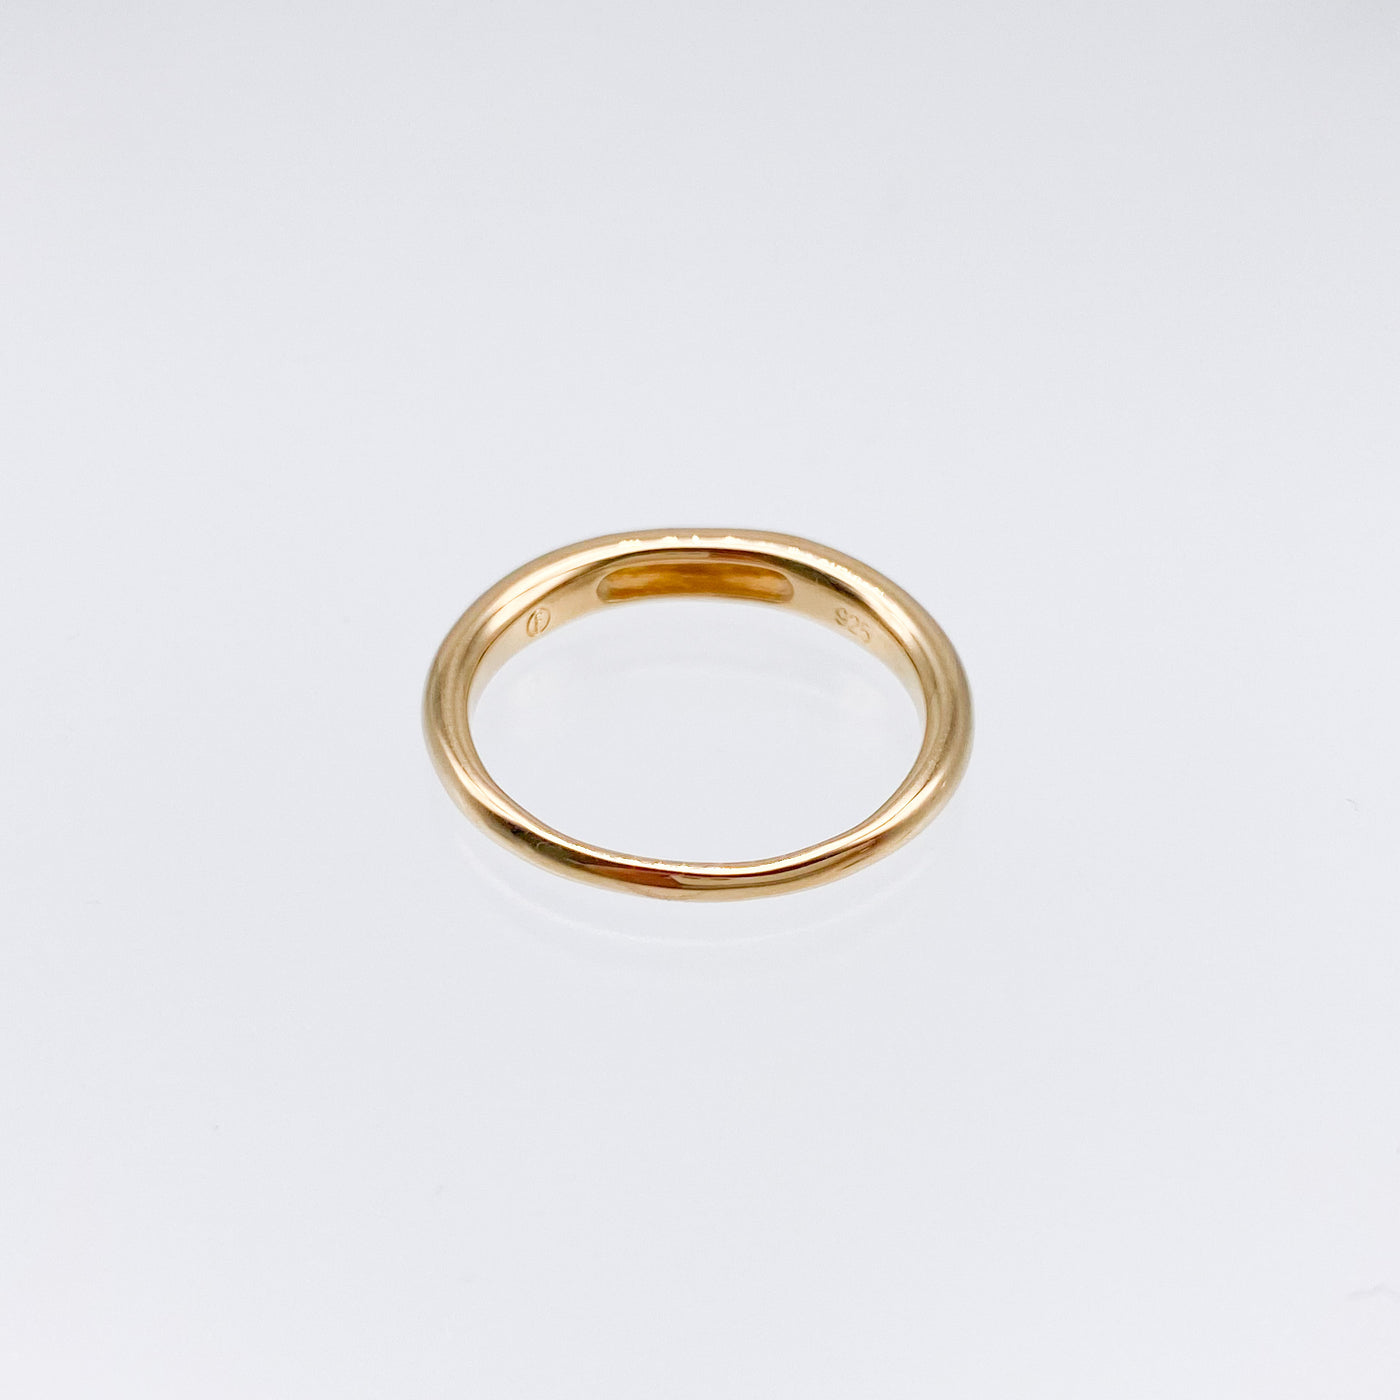 Square space ring